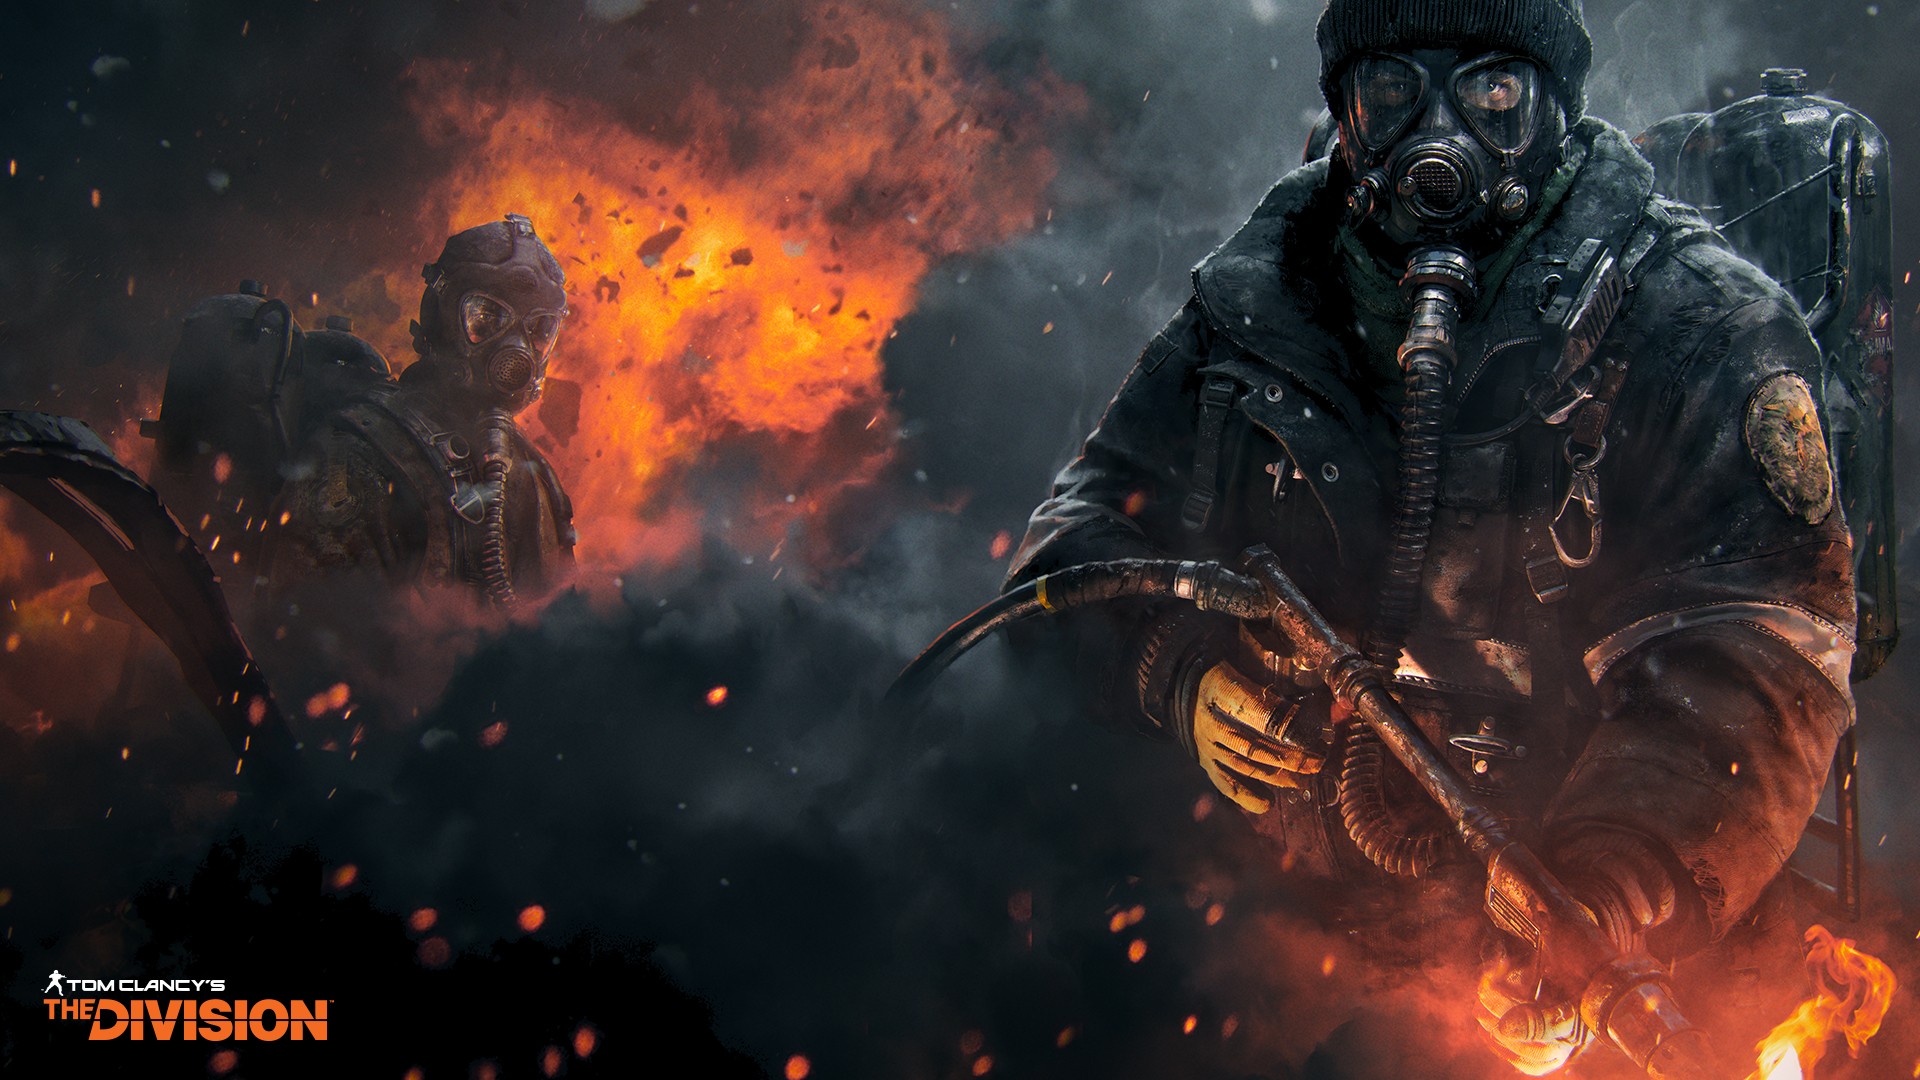 Tom Clancys The Division Video Games Flamethrower Video Game Art PC Gaming 1920x1080